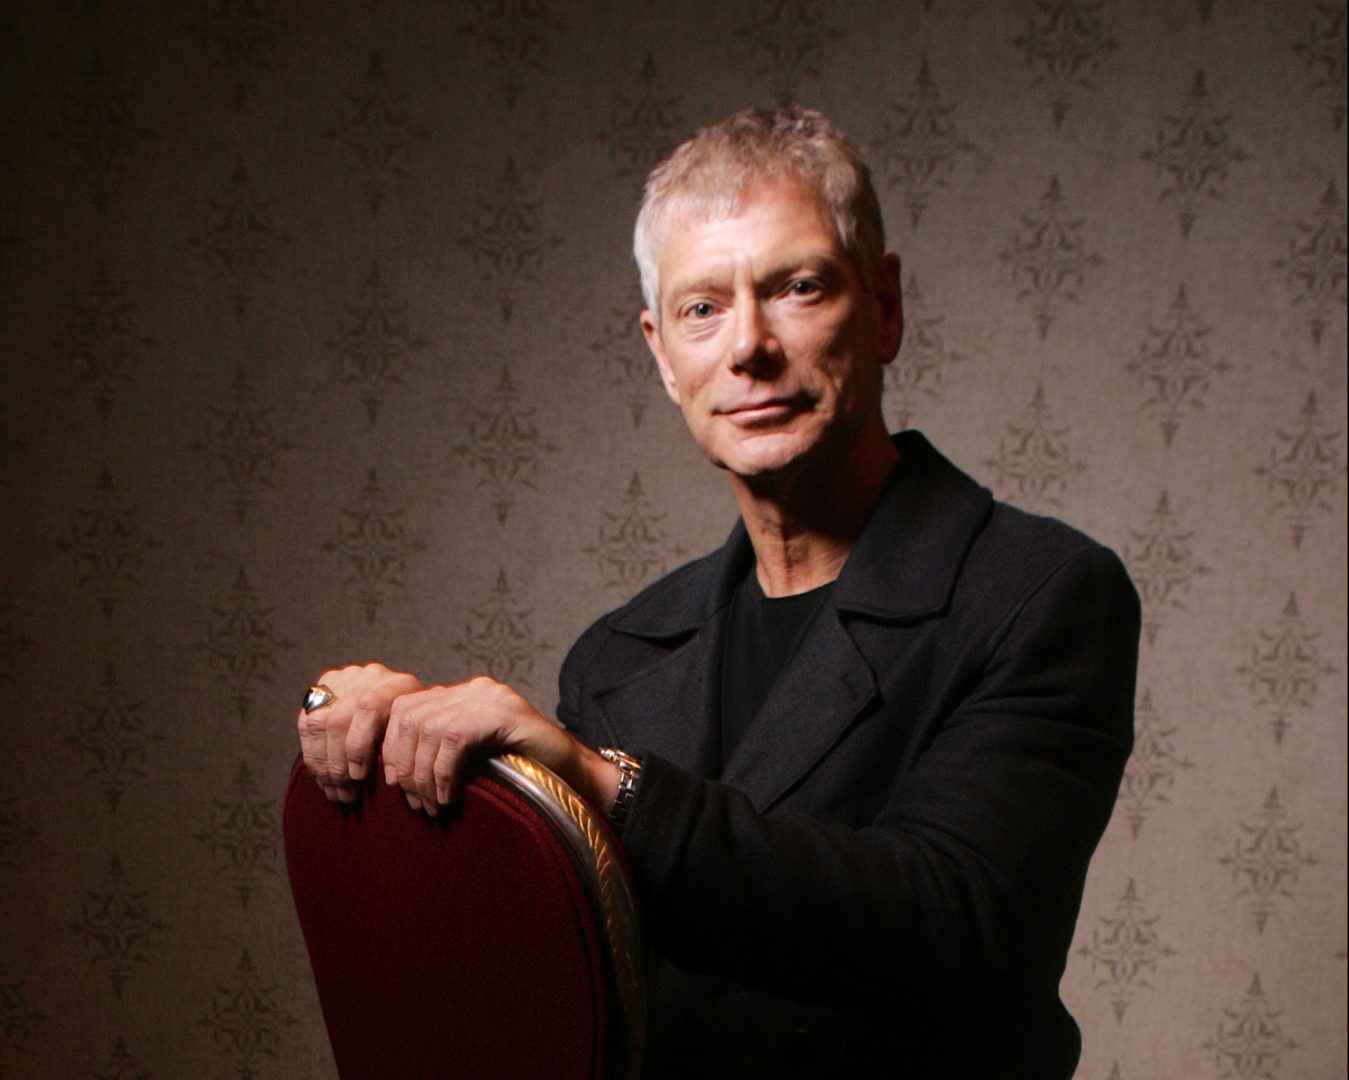 FILE PHOTO: Stephen Lang poses for a portrait at the Toronto International Film Festival in Toronto on Sept. 14, 2010. Lang released a children's book about the Battle of Gettysburg.